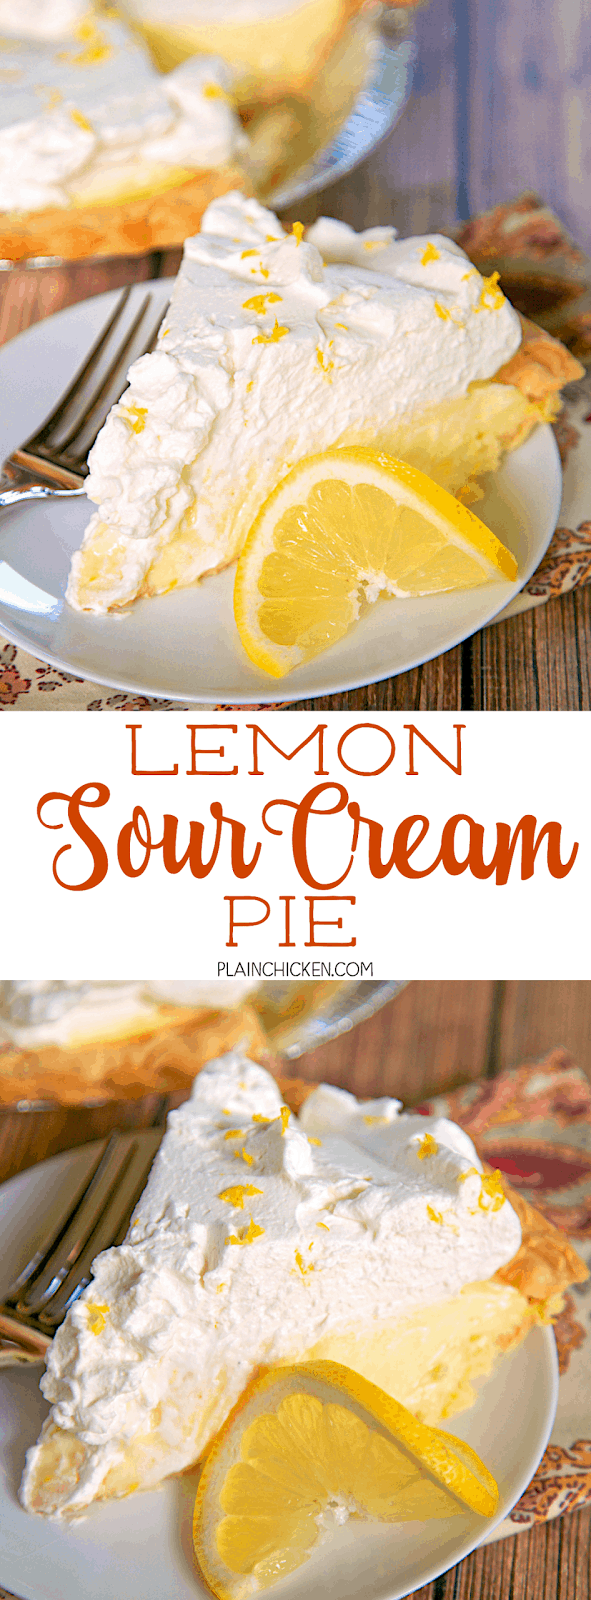 Lemon Sour Cream Pie - quick homemade lemon and sour cream filling topped with fresh whipped cream. SO light and delicious! A new favorite!! Great for potlucks and the holidays.